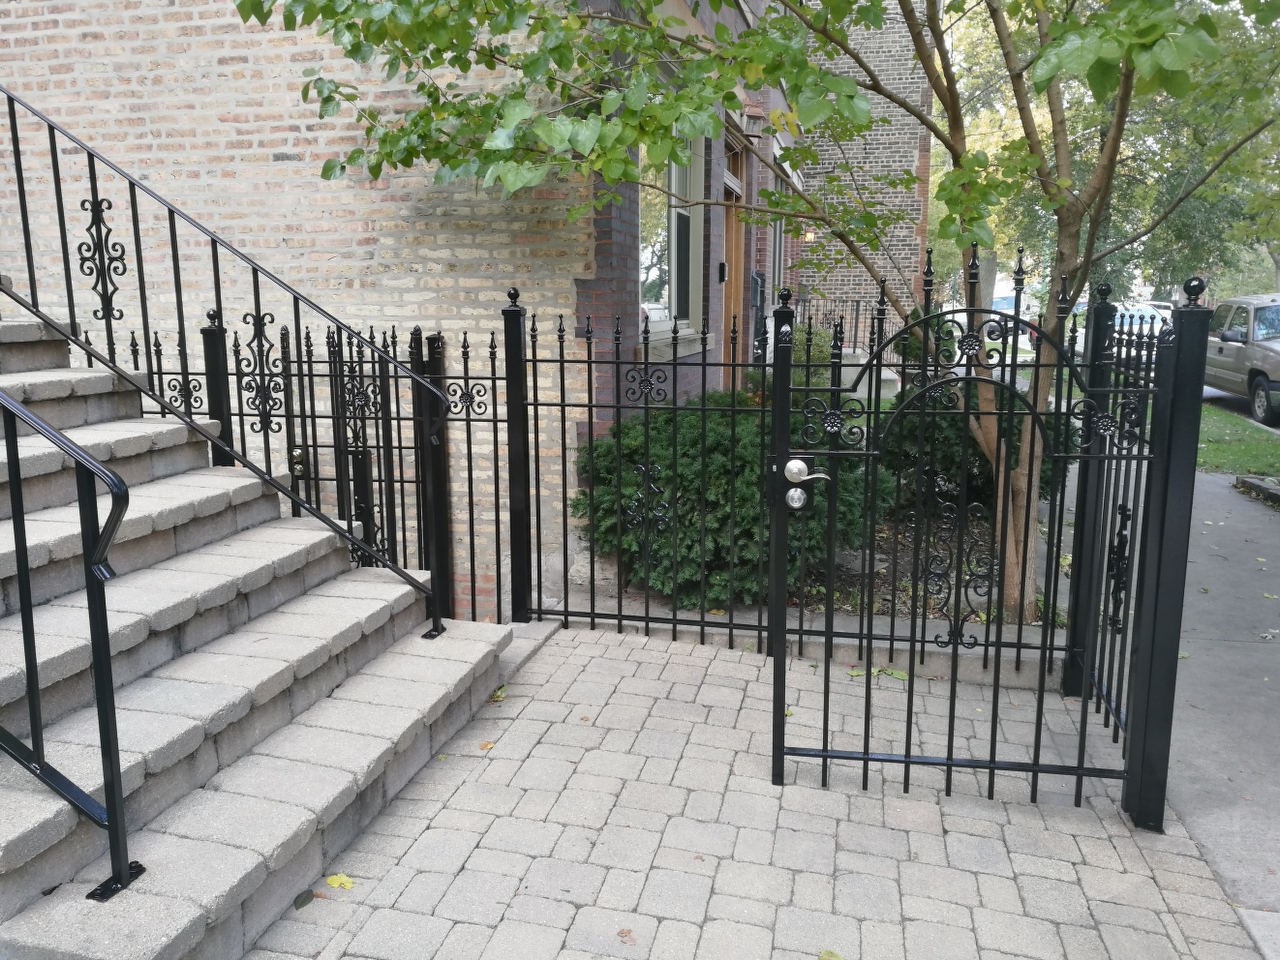 2017.10.30._Wicker_Par_railings_fence_stairs_rust_removal - Windy-Painters-.-Chicago-painter.-Wrought-iron-fence.-Railings.-Steps.-Rust-removal-and-refinishing.-Wicker-Park.-Bucktown-West-Town-4.jpg